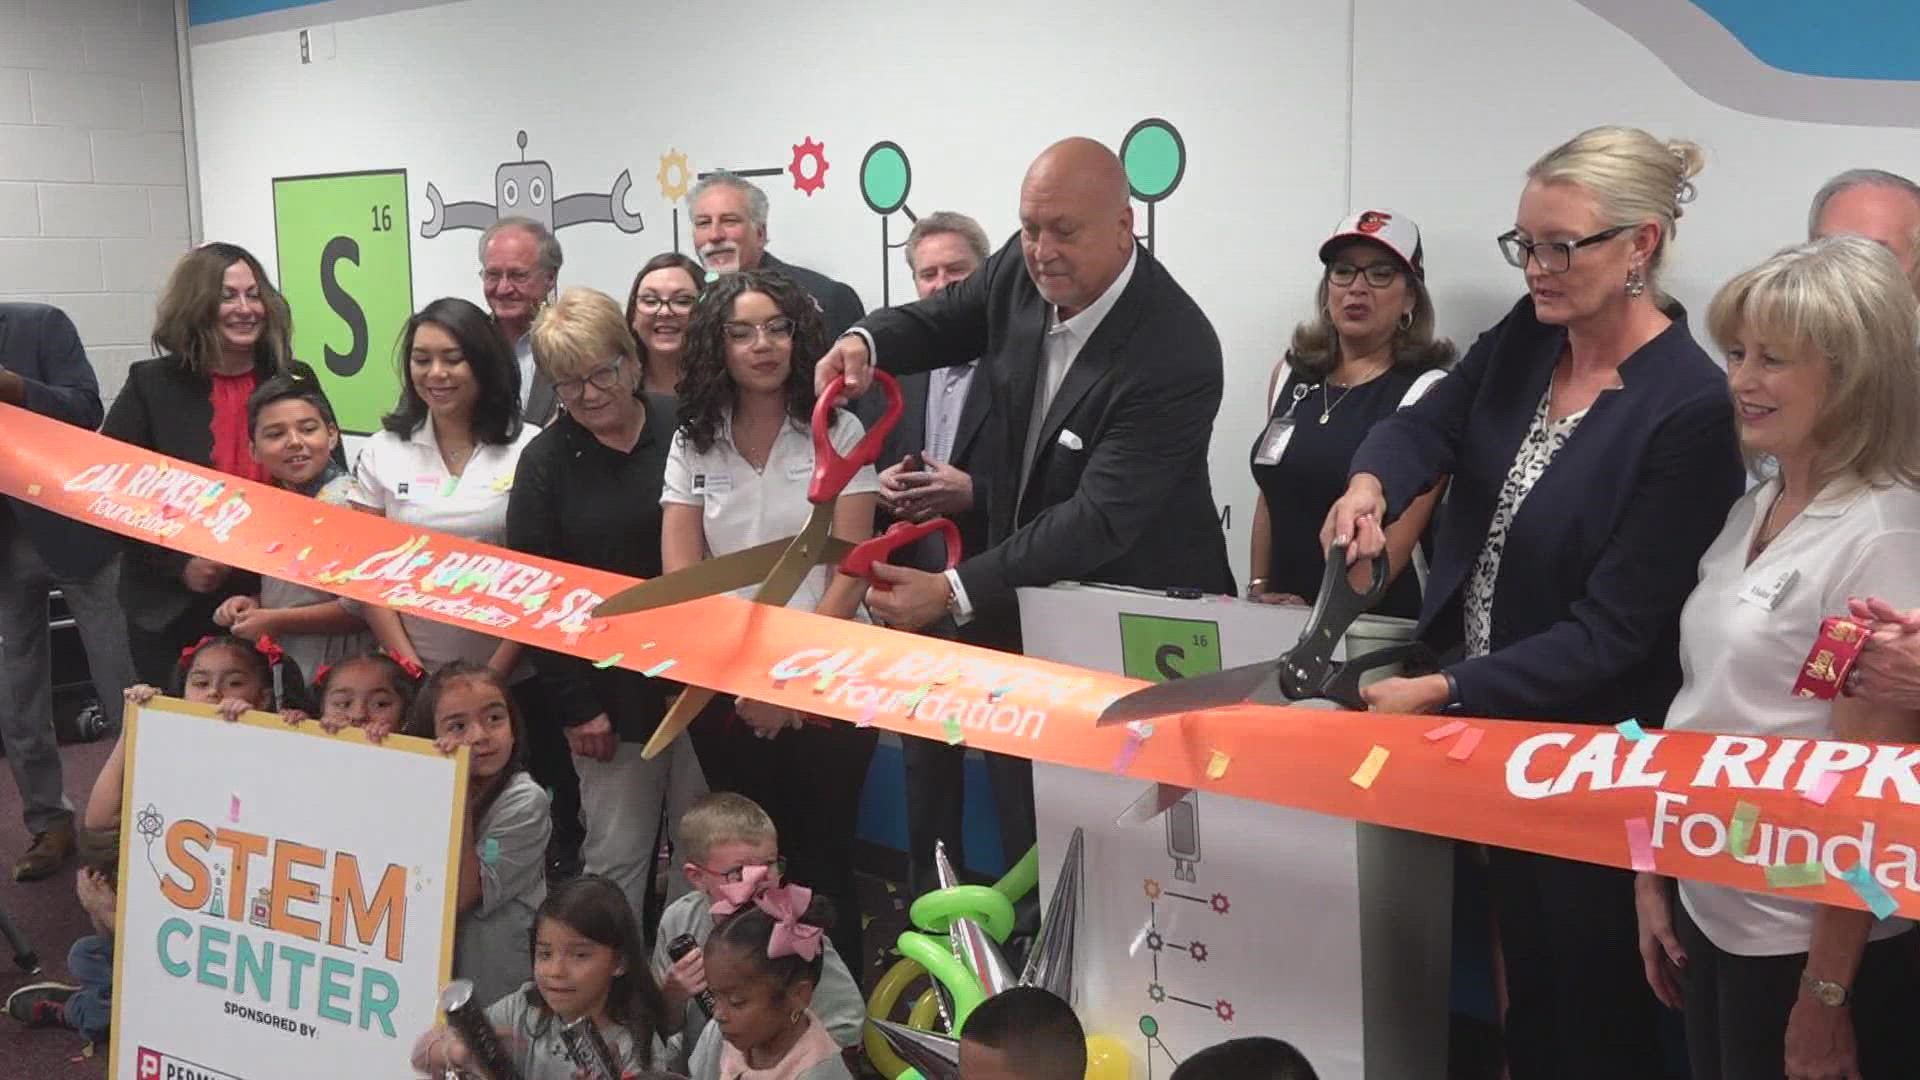 The project is thanks to the Cal Ripken, Sr. Foundation and Permian Strategic Partnership.